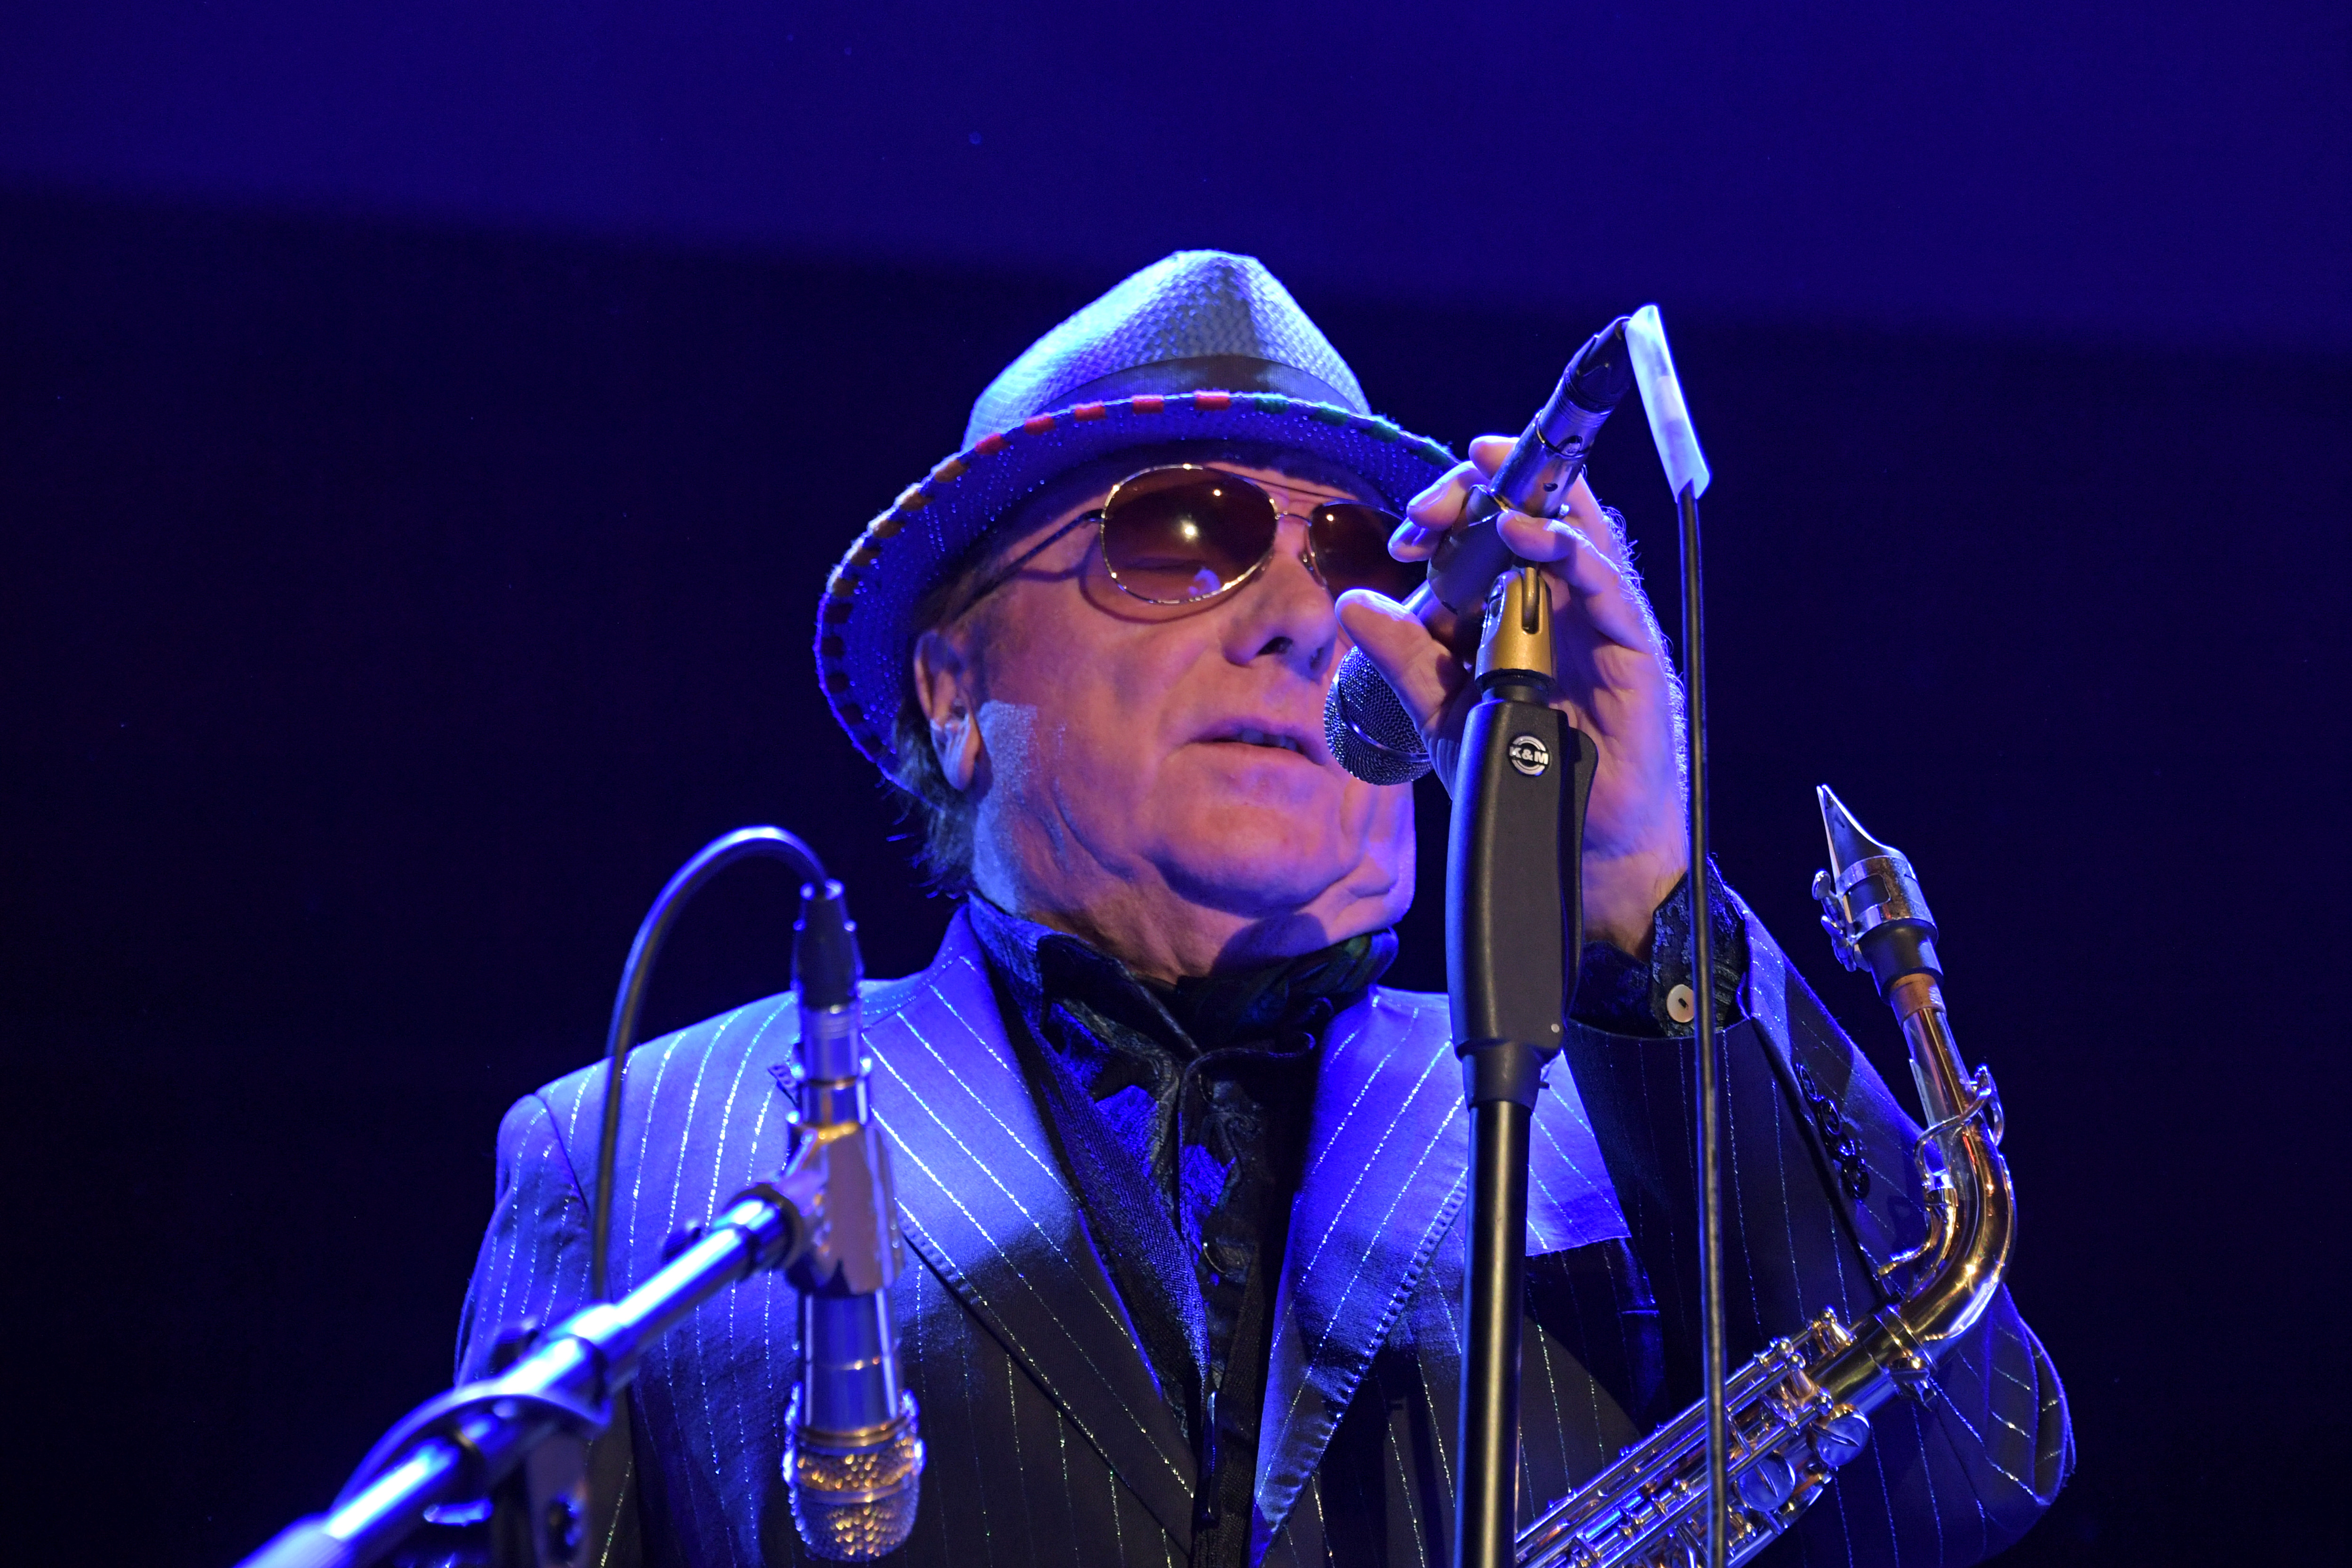 Van Morrison performs at "A Night At Ronnie Scotts: 60th Anniversary Gala" at the Royal Albert Hall on October 30, 2019 in London, England